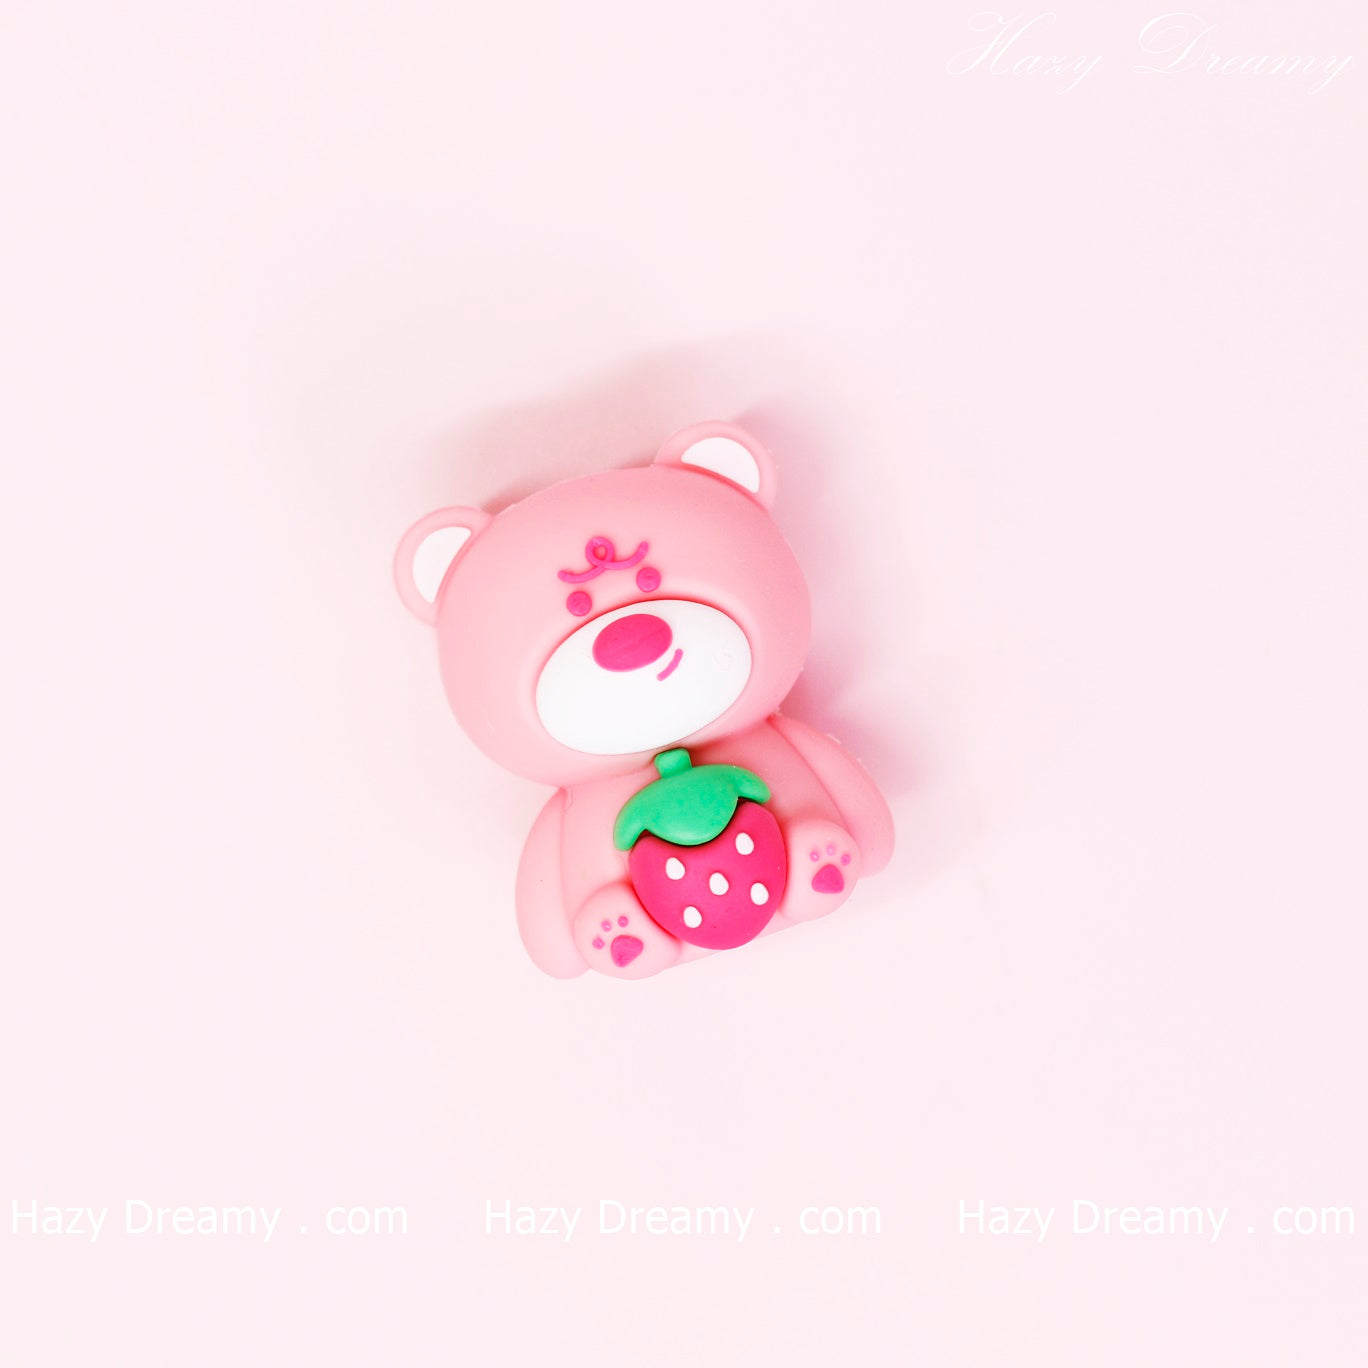 Charming Soft Pink Bear 3D Eraser - Ideal for Kids and Stationery Enthusiasts